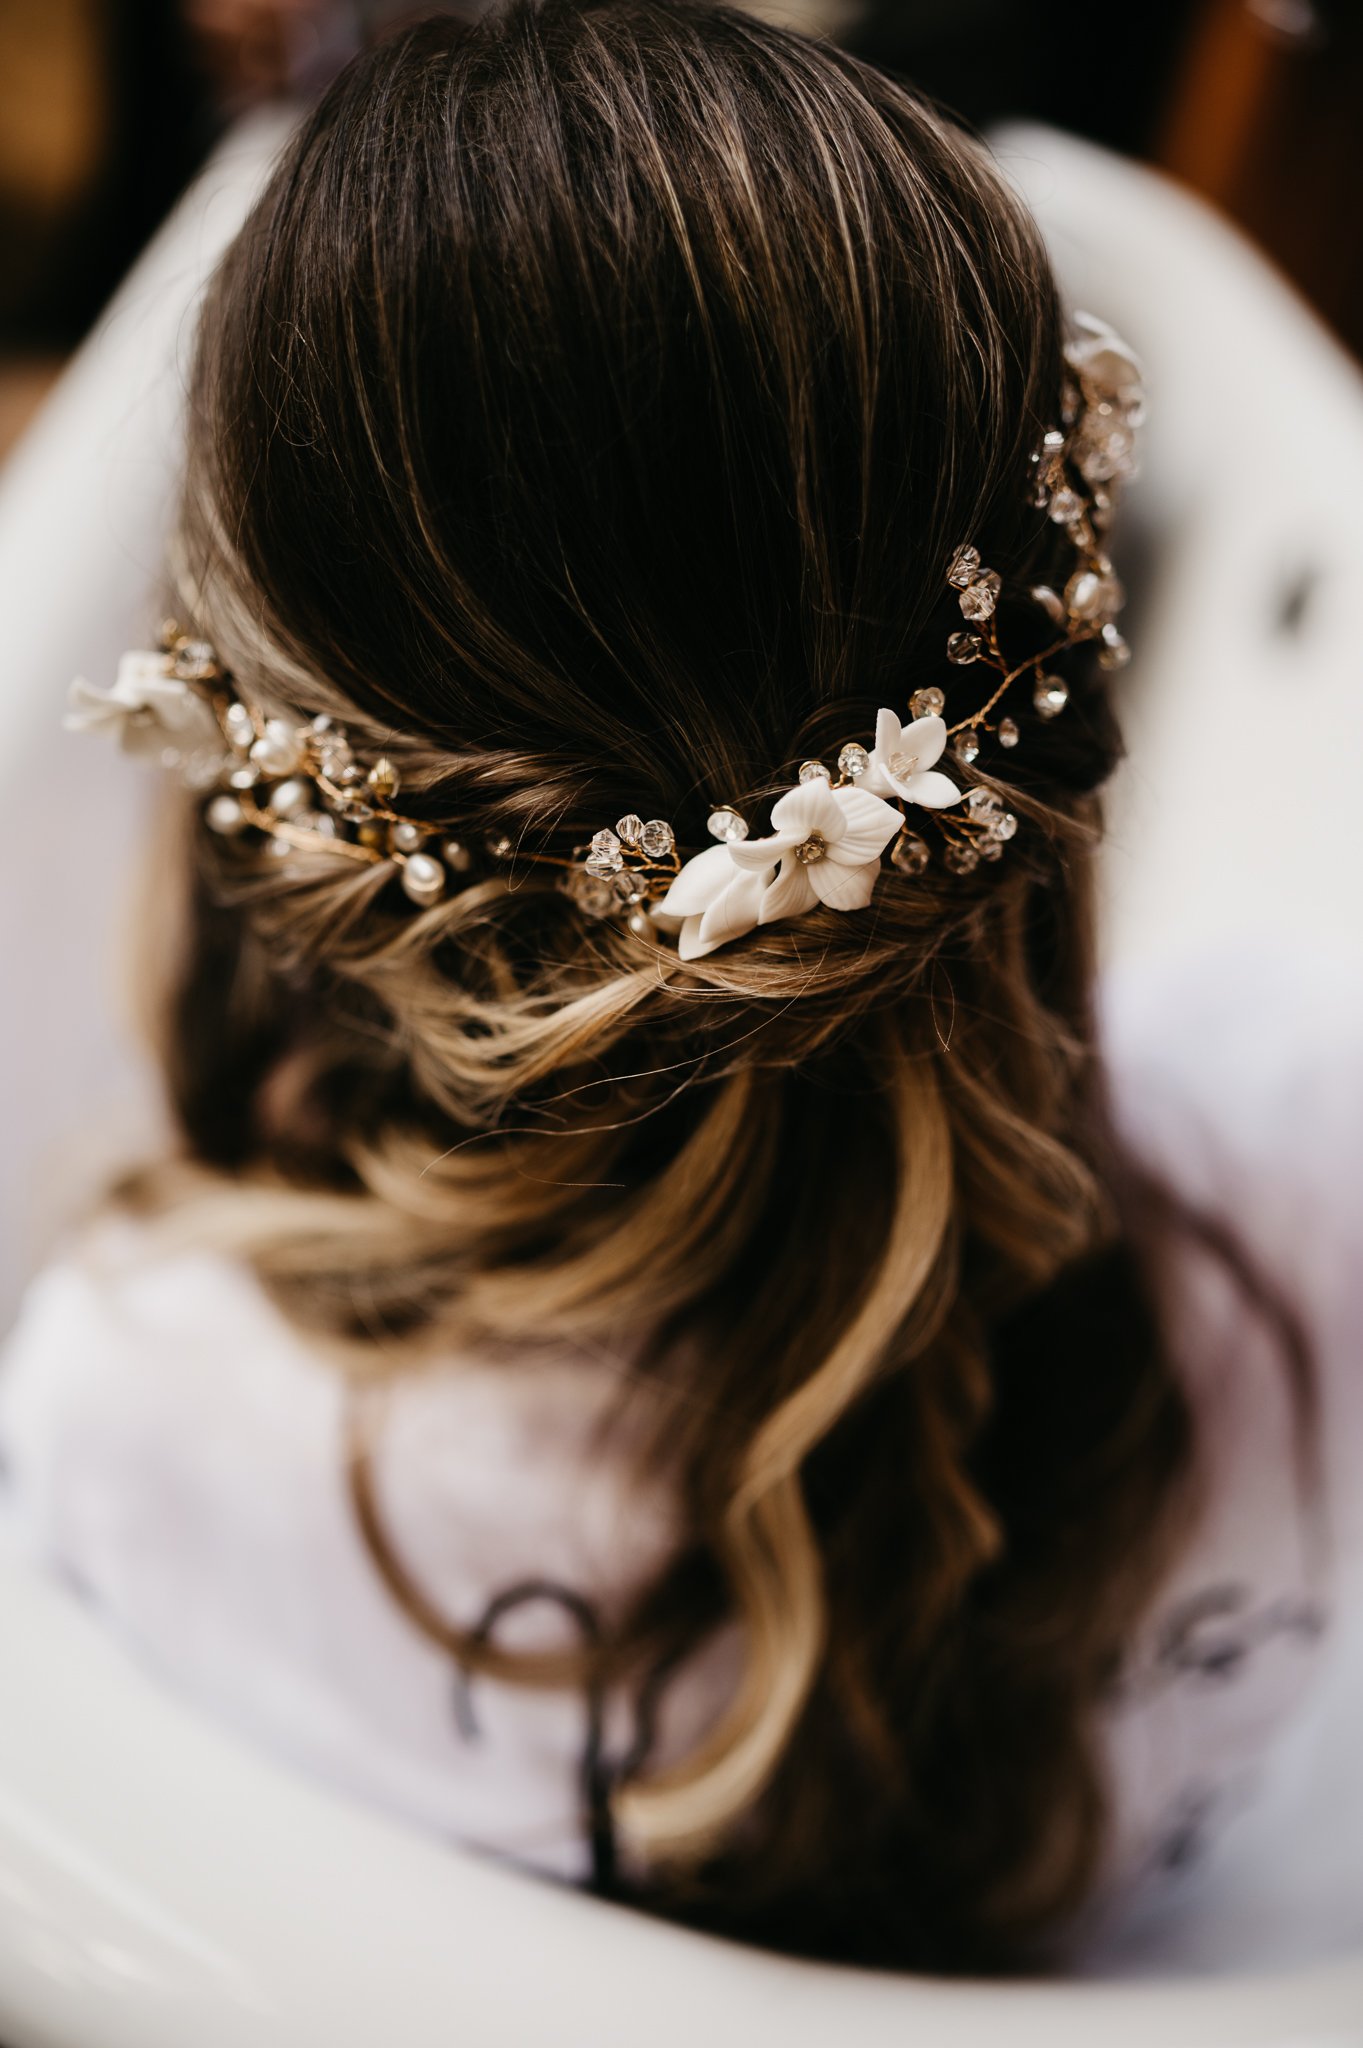 Brides long brown hair with sides pulled back with flowers intwind in hair